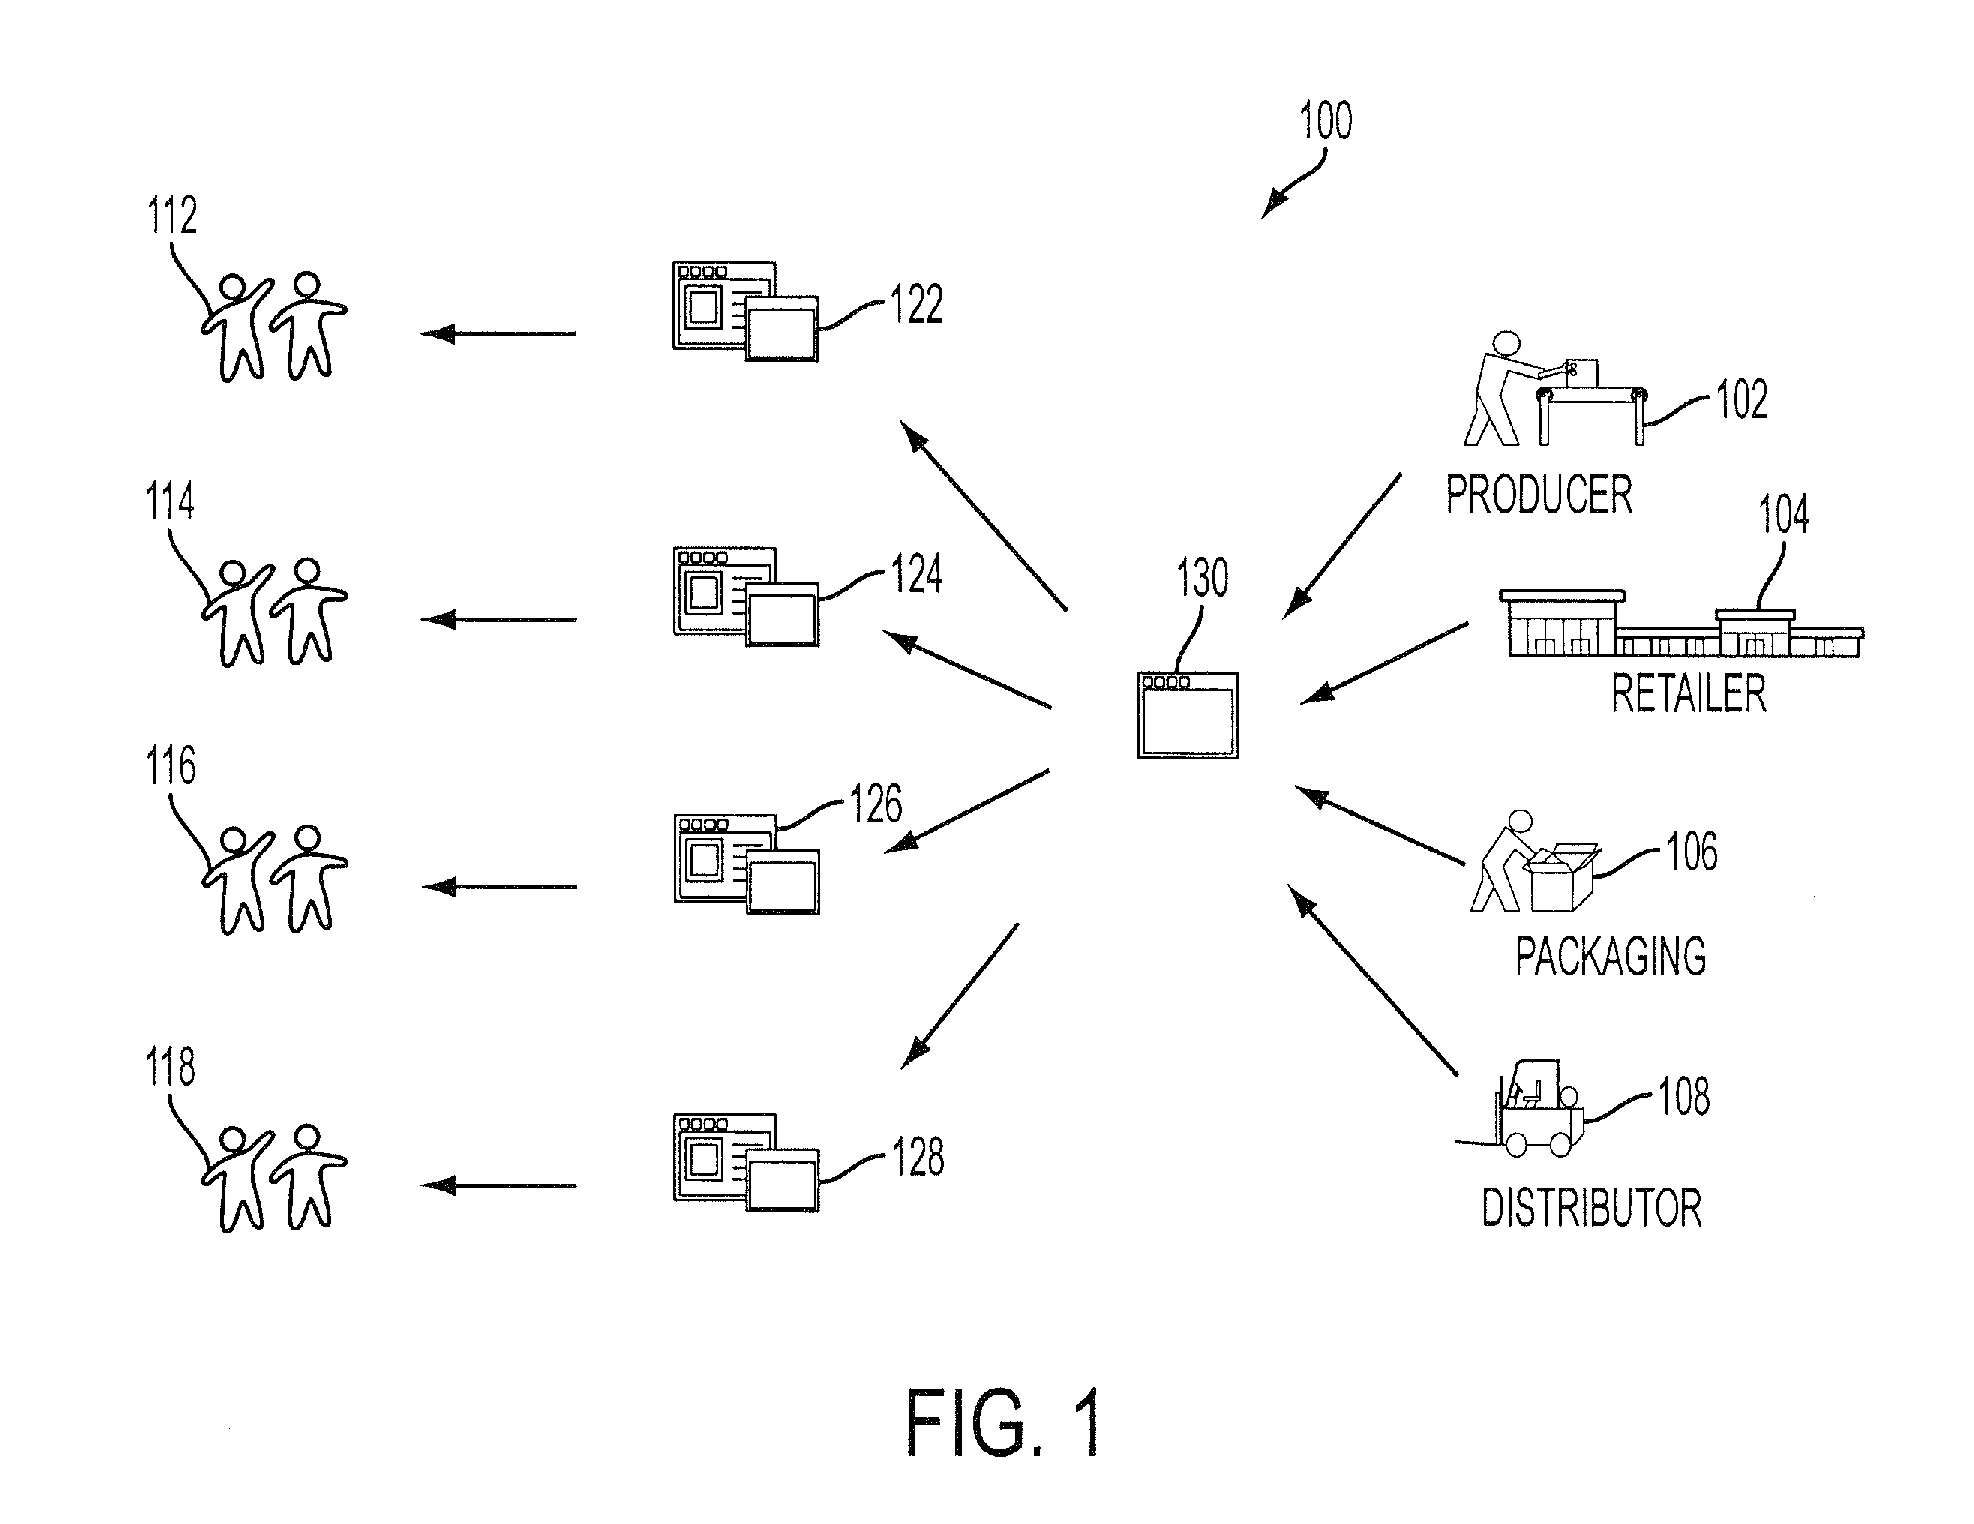 System and Method for Aggregating Delivery of Goods or Services